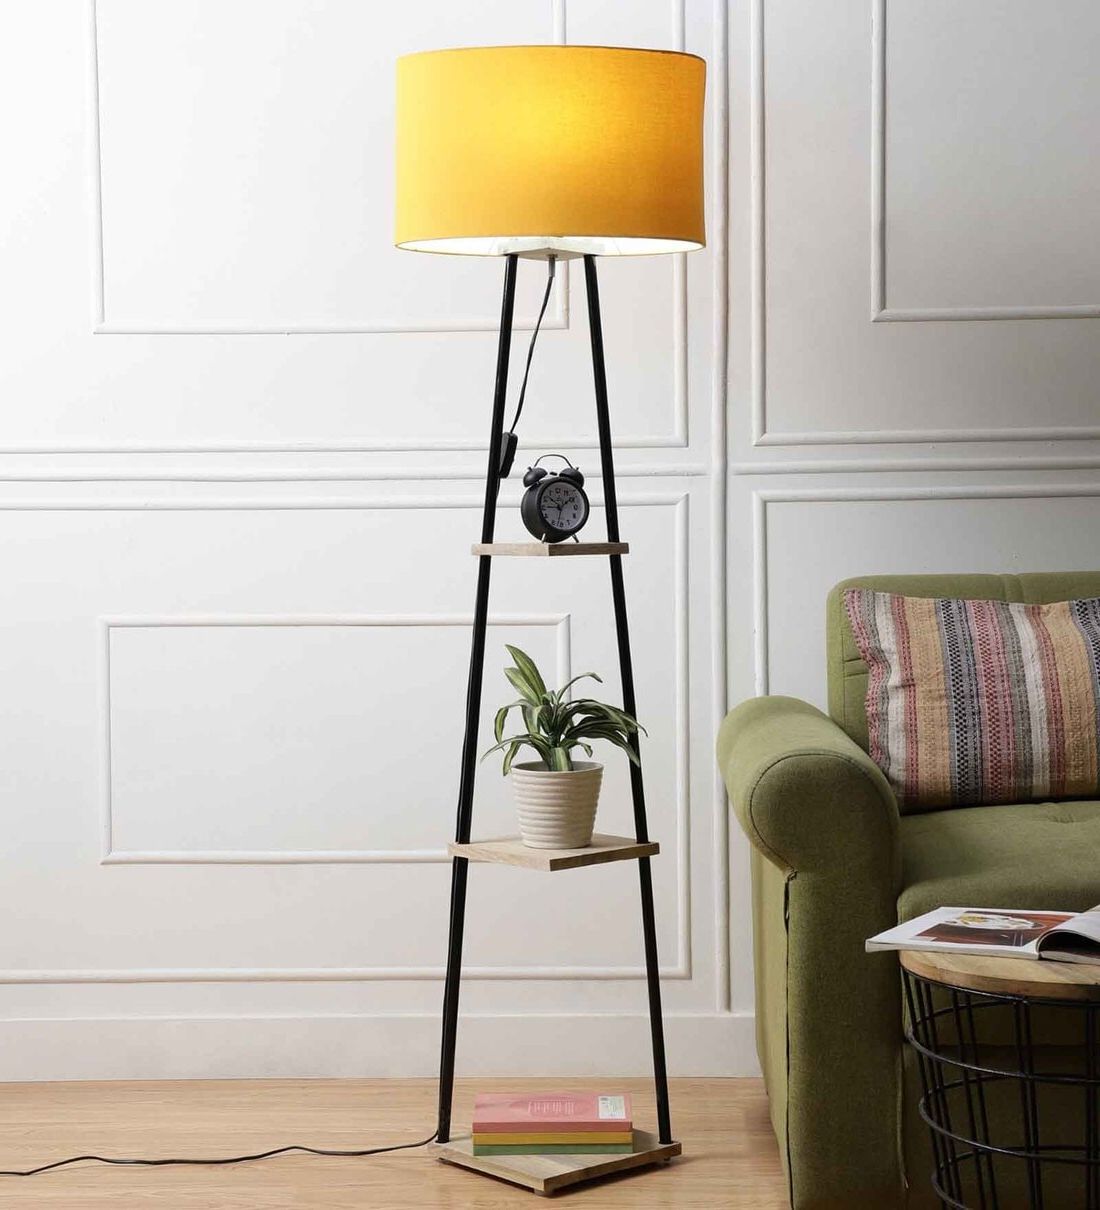 Buy Yellow Midwest Fabric Shade 3 Tier Shelf Storage Floor Lamp With Metal  Basesanded Edge Online – Shelf Floor Lamps – Lamps – Lamps And Lighting  – Pepperfry Product With 3 Tier Floor Lamps (View 3 of 20)